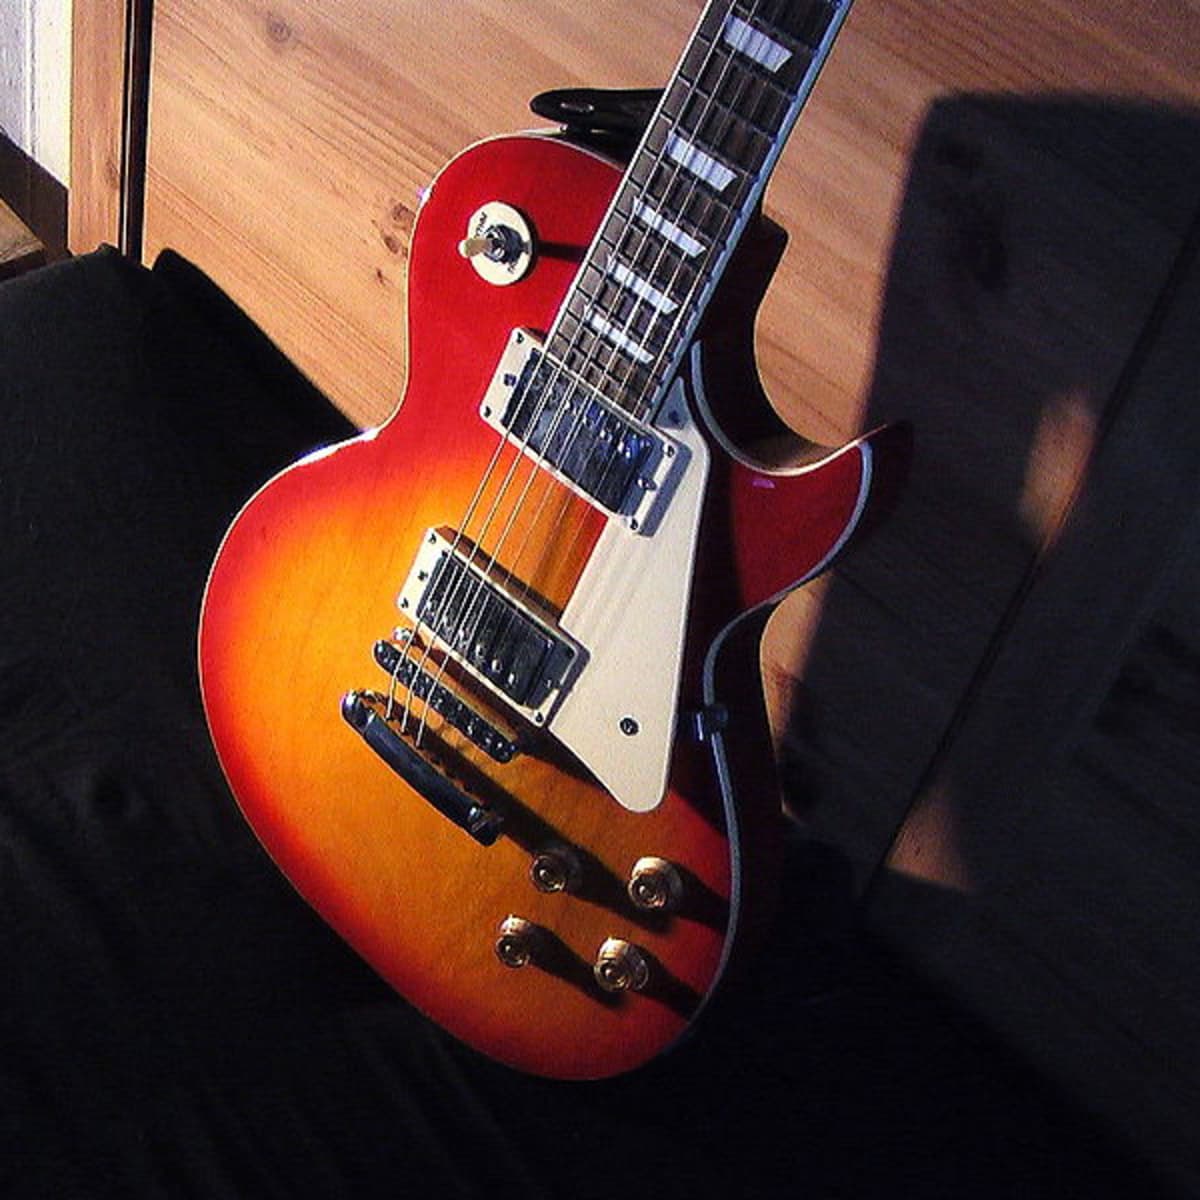 Gibson Les Paul Studio vs. Standard vs. Epiphone Review - Spinditty